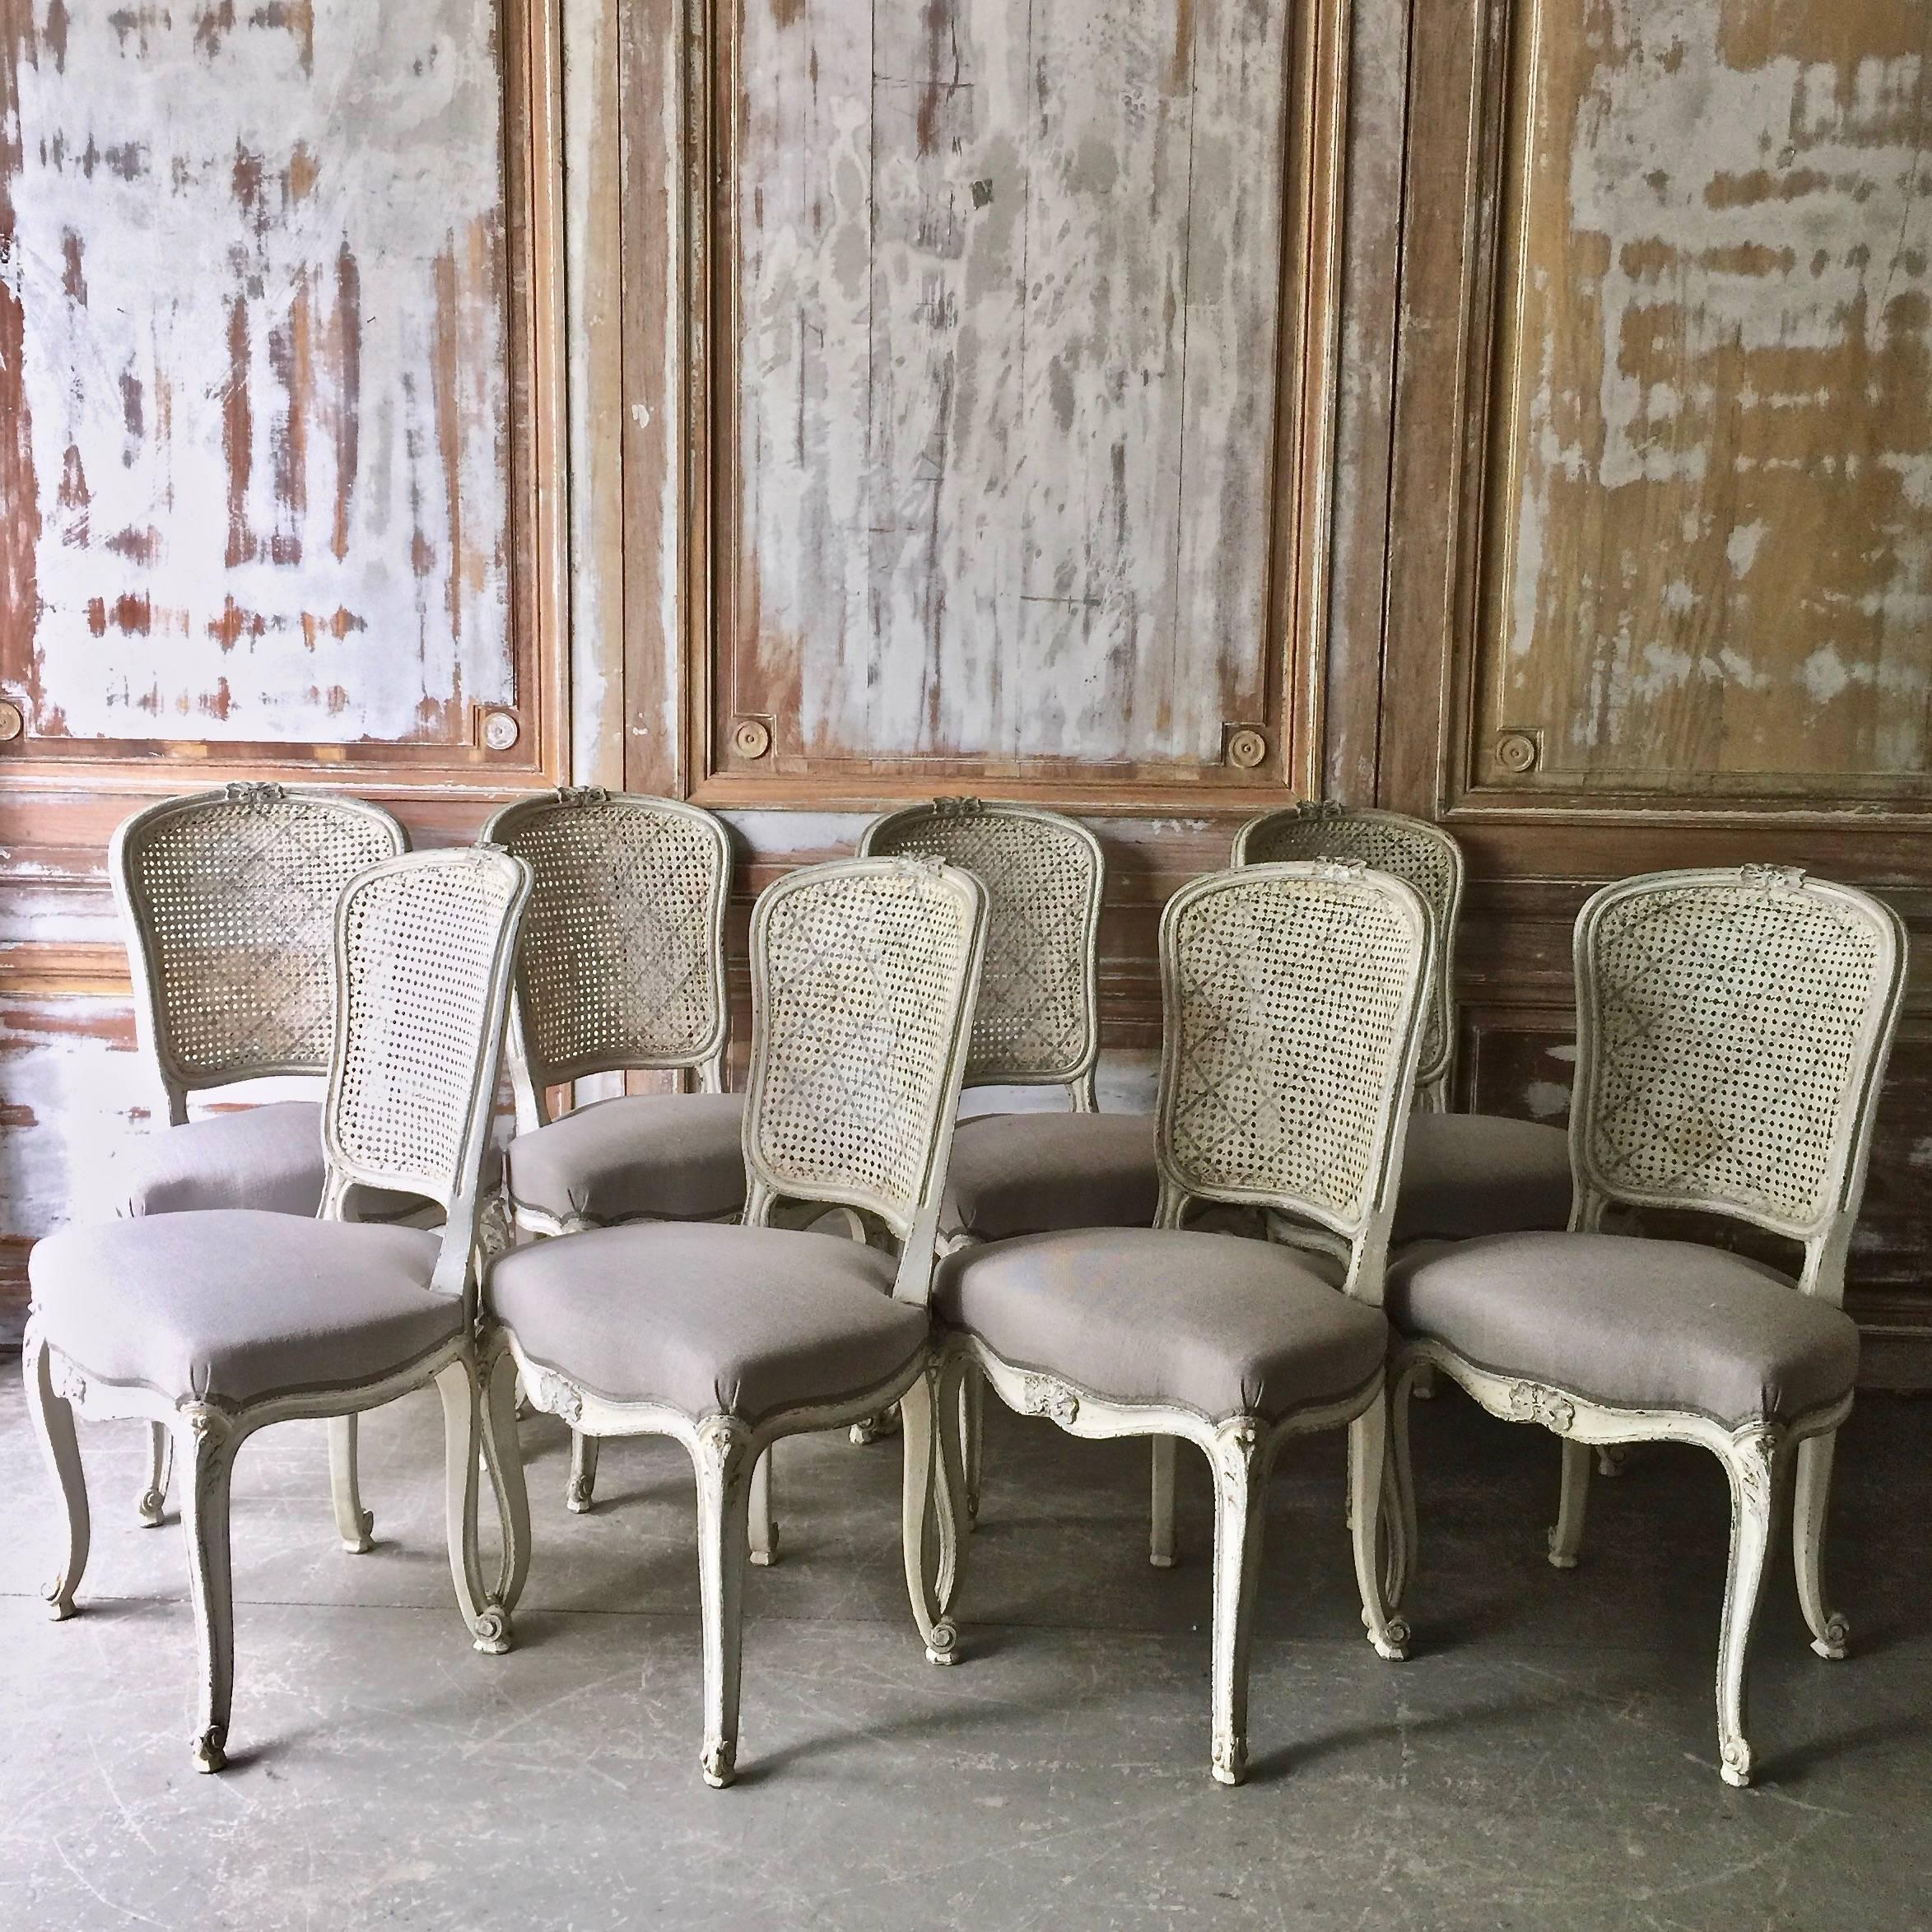 Set of eight French dining chairs Louis XV style with flat back called “la Reine” is caned and scalloped frieze carved and raised on cabriole legs. Upholstered in light gray linen with classical decorative gimp trim. Very elegant as well as